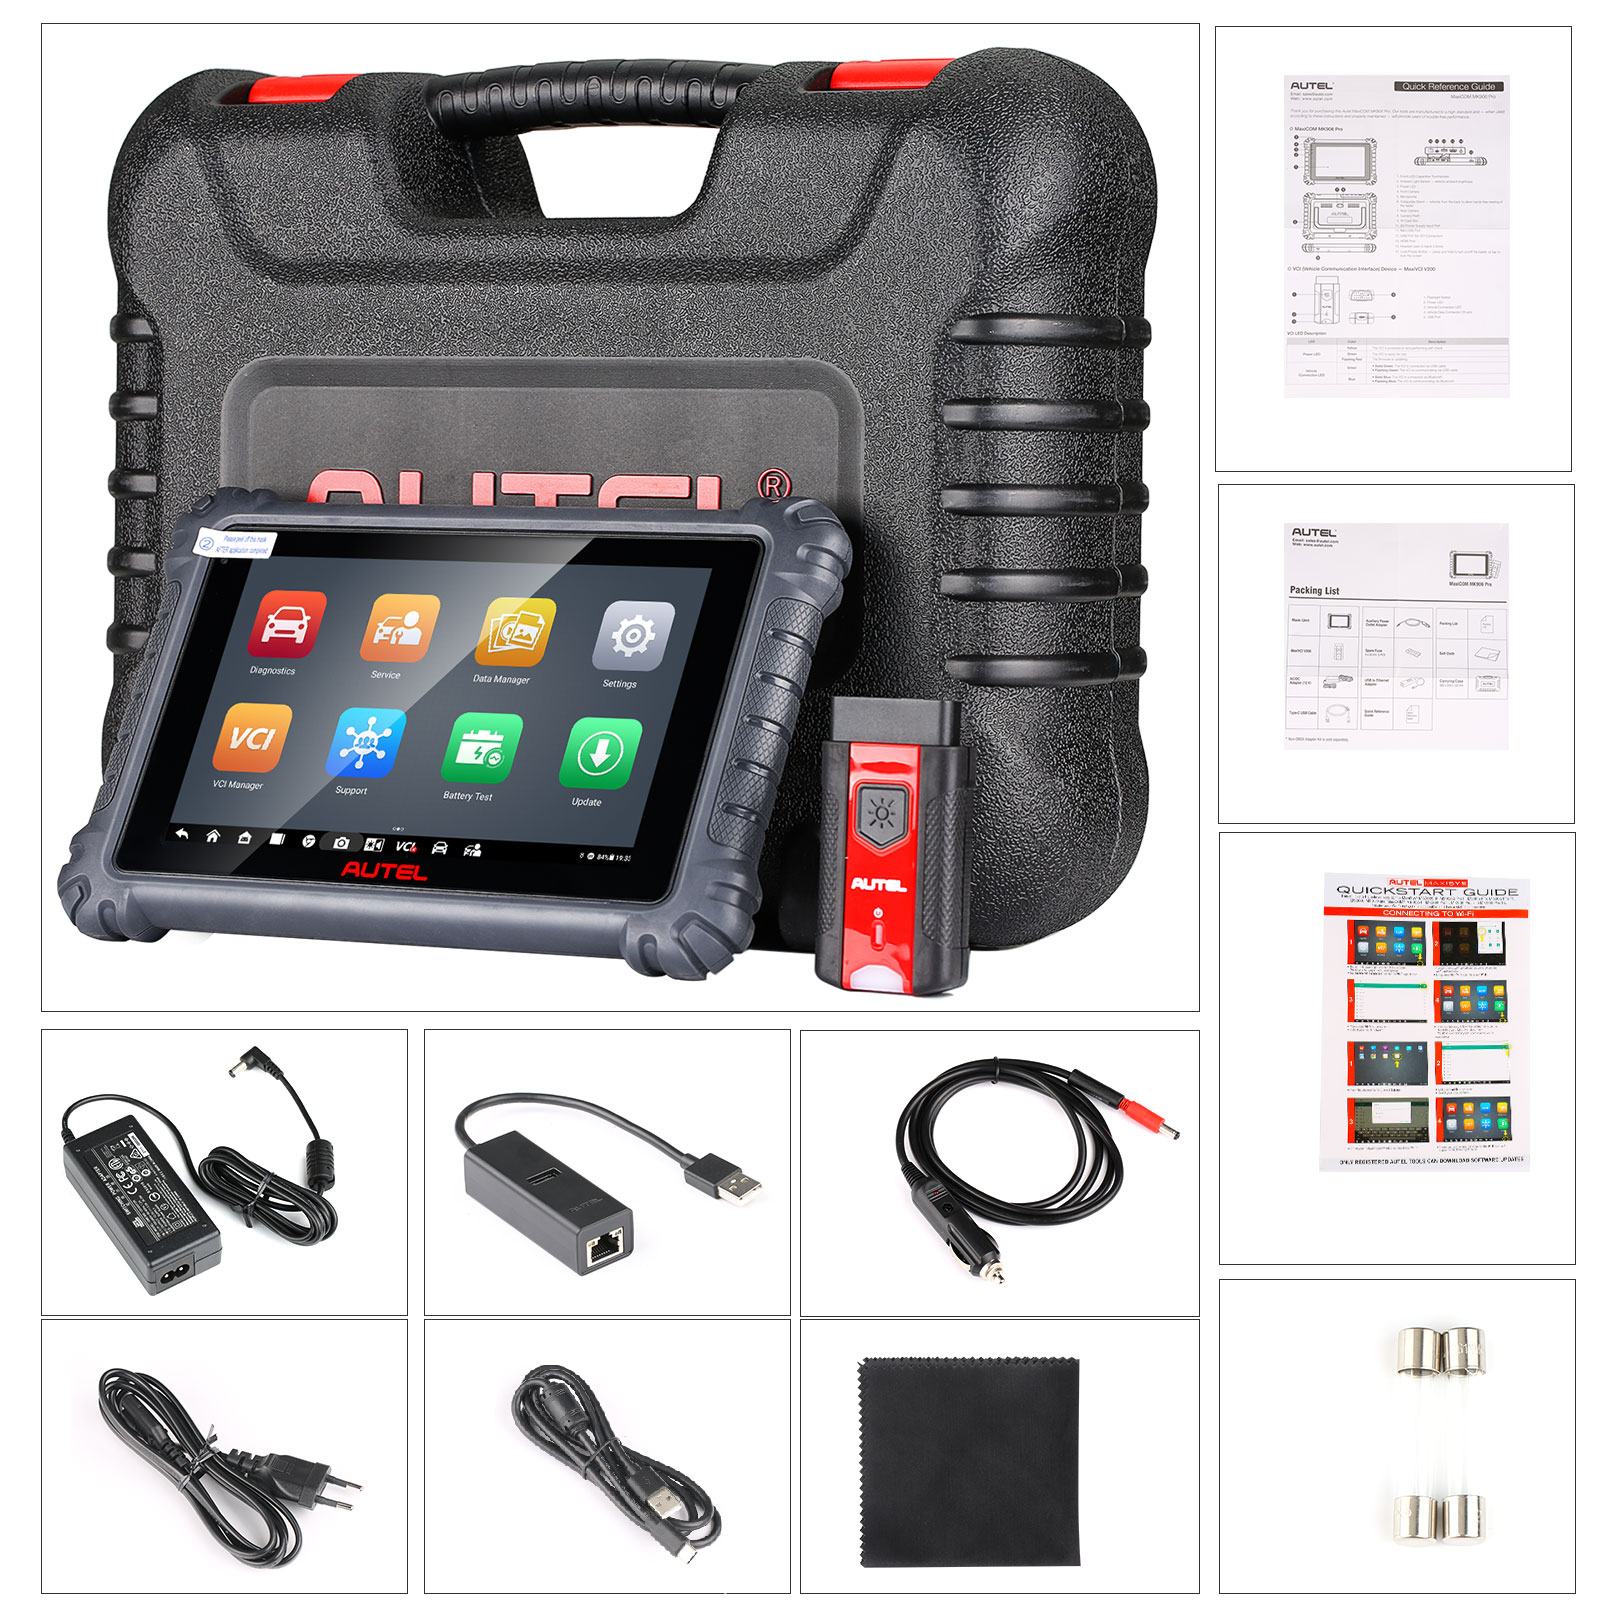 Autel MaxiSys MS906 Pro One Year Update Service, Lowest Price